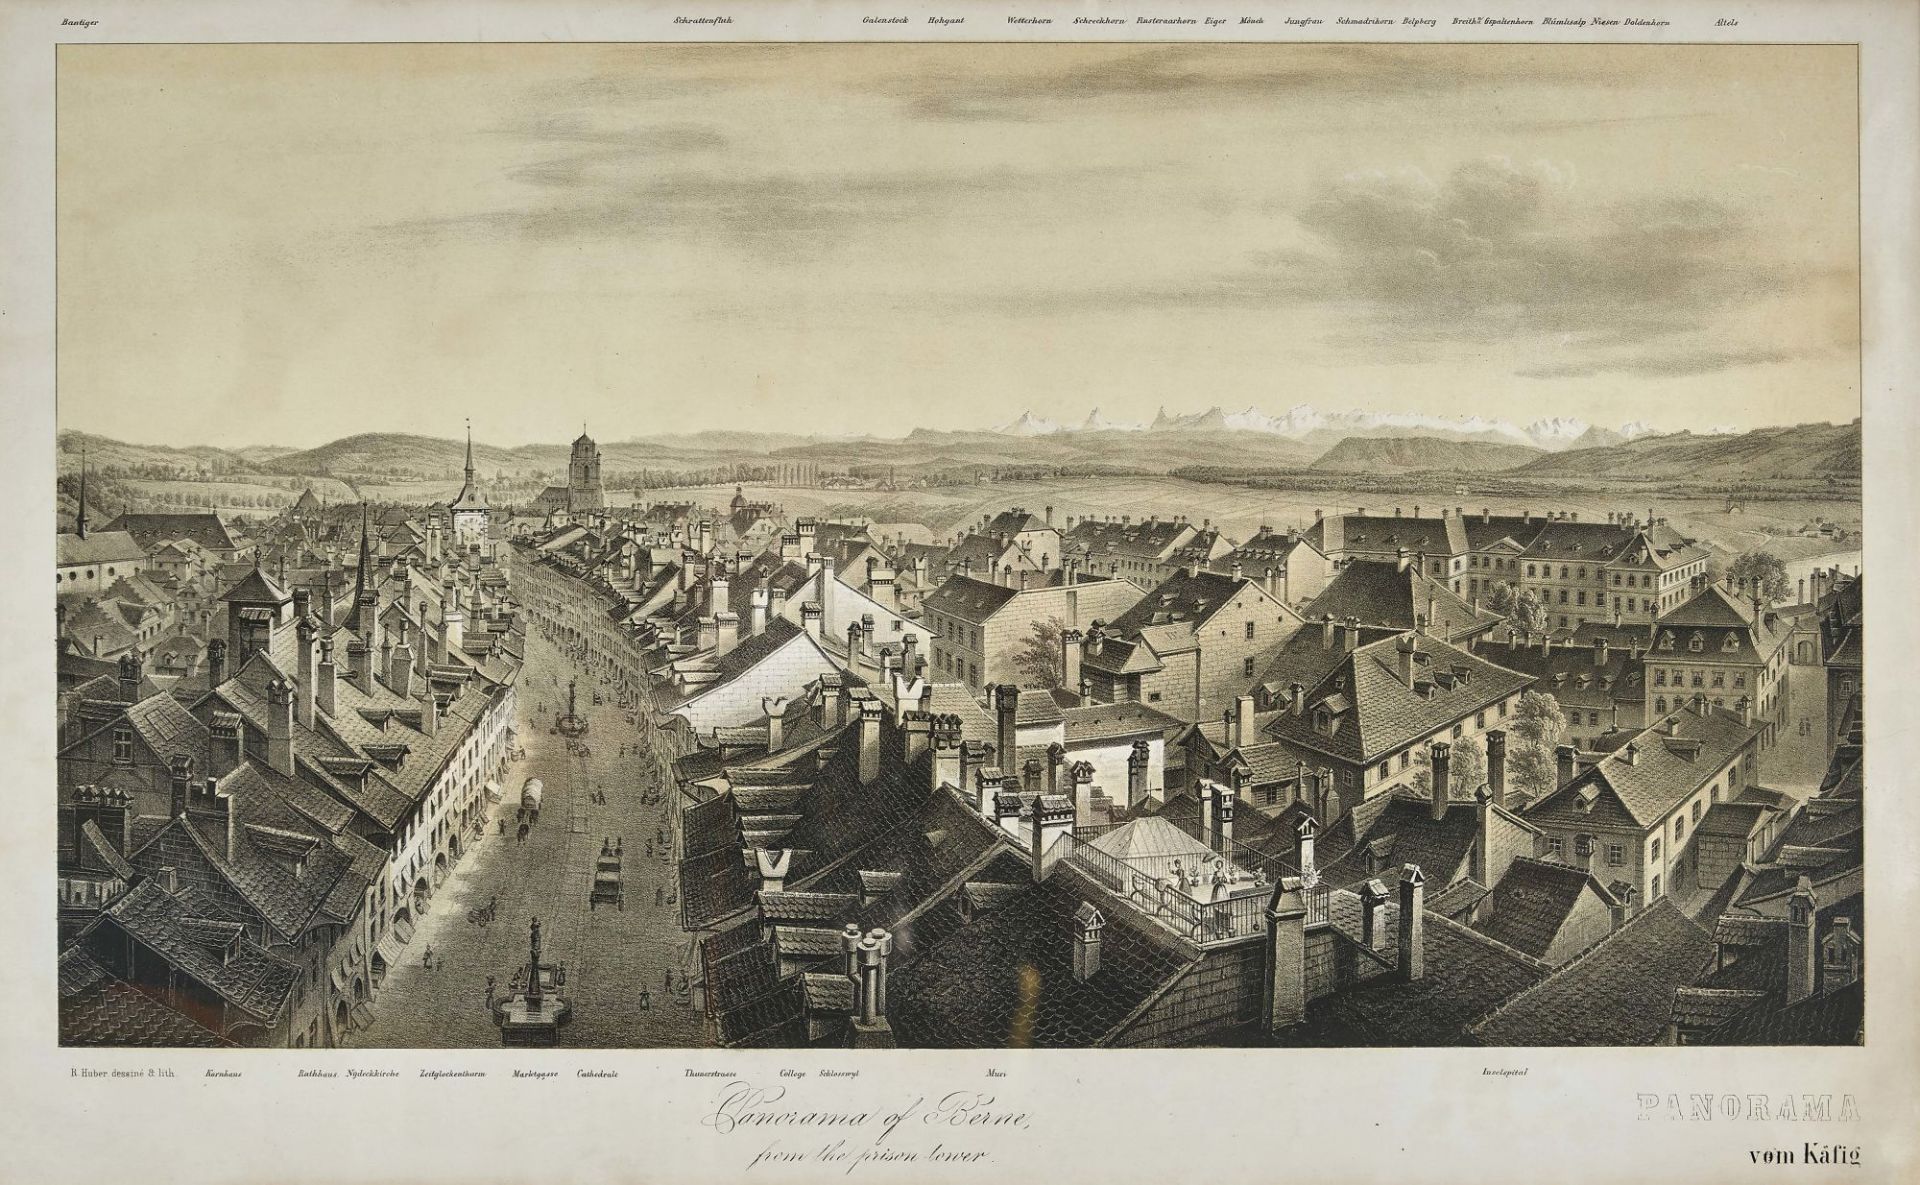 HUBER, RUDOLF: "Panorama of Berne from the prison Tower".